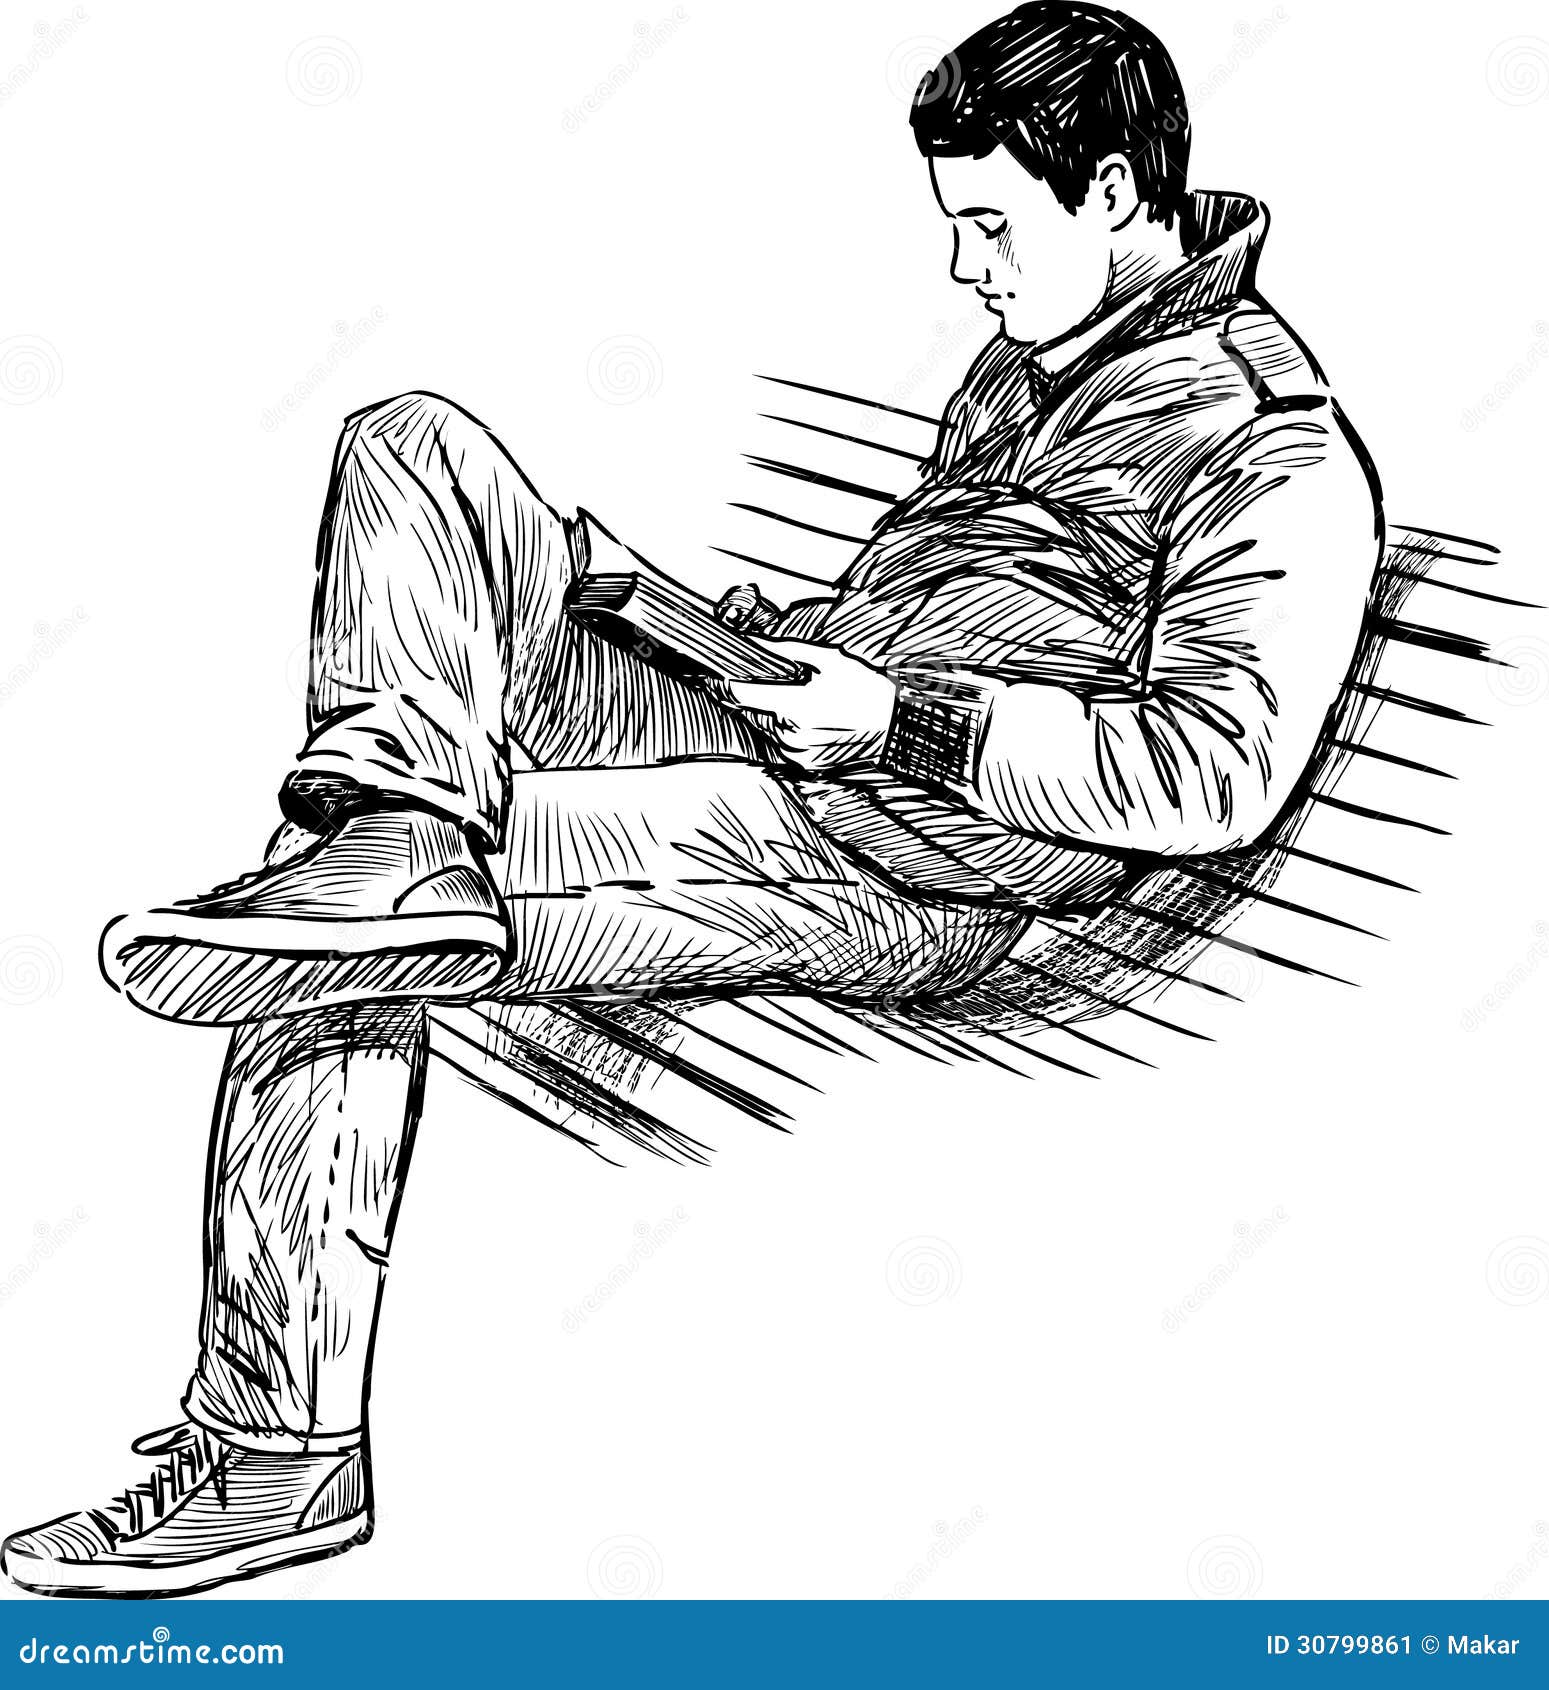 Young man reading a book stock vector. Illustration of